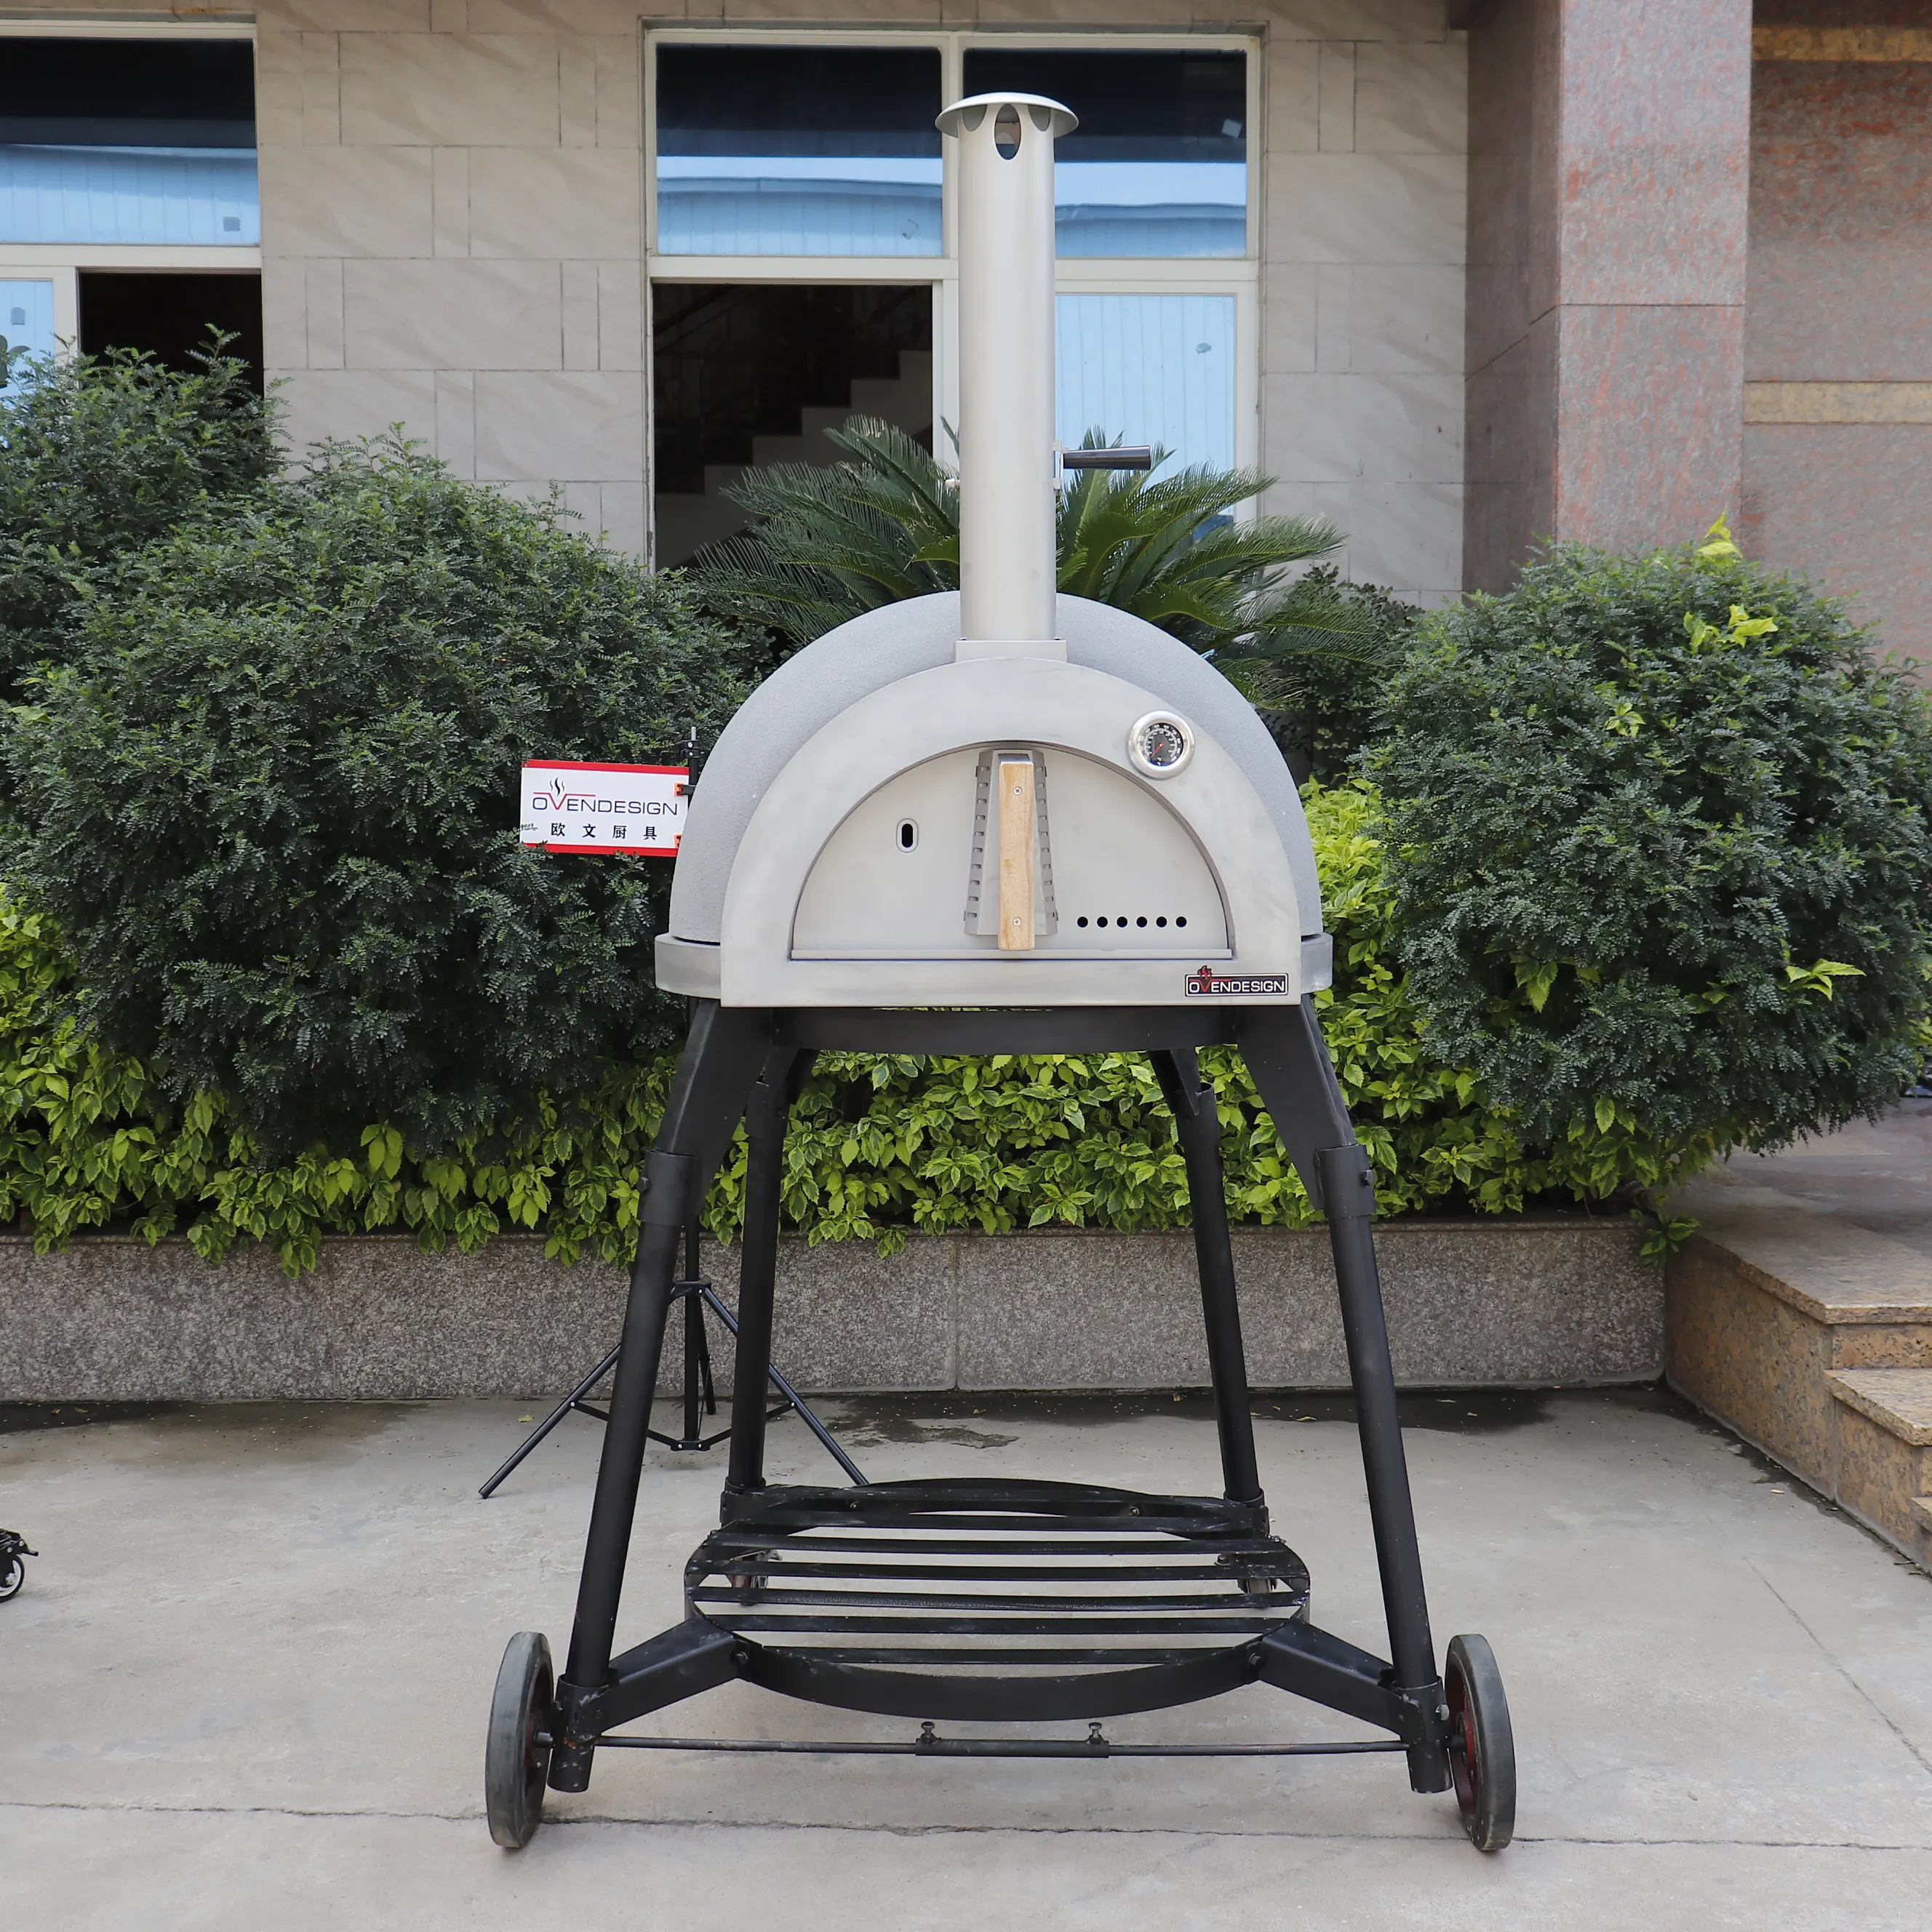 New design Clay pizza oven with stand to cook pizza oven wooden pizza oven